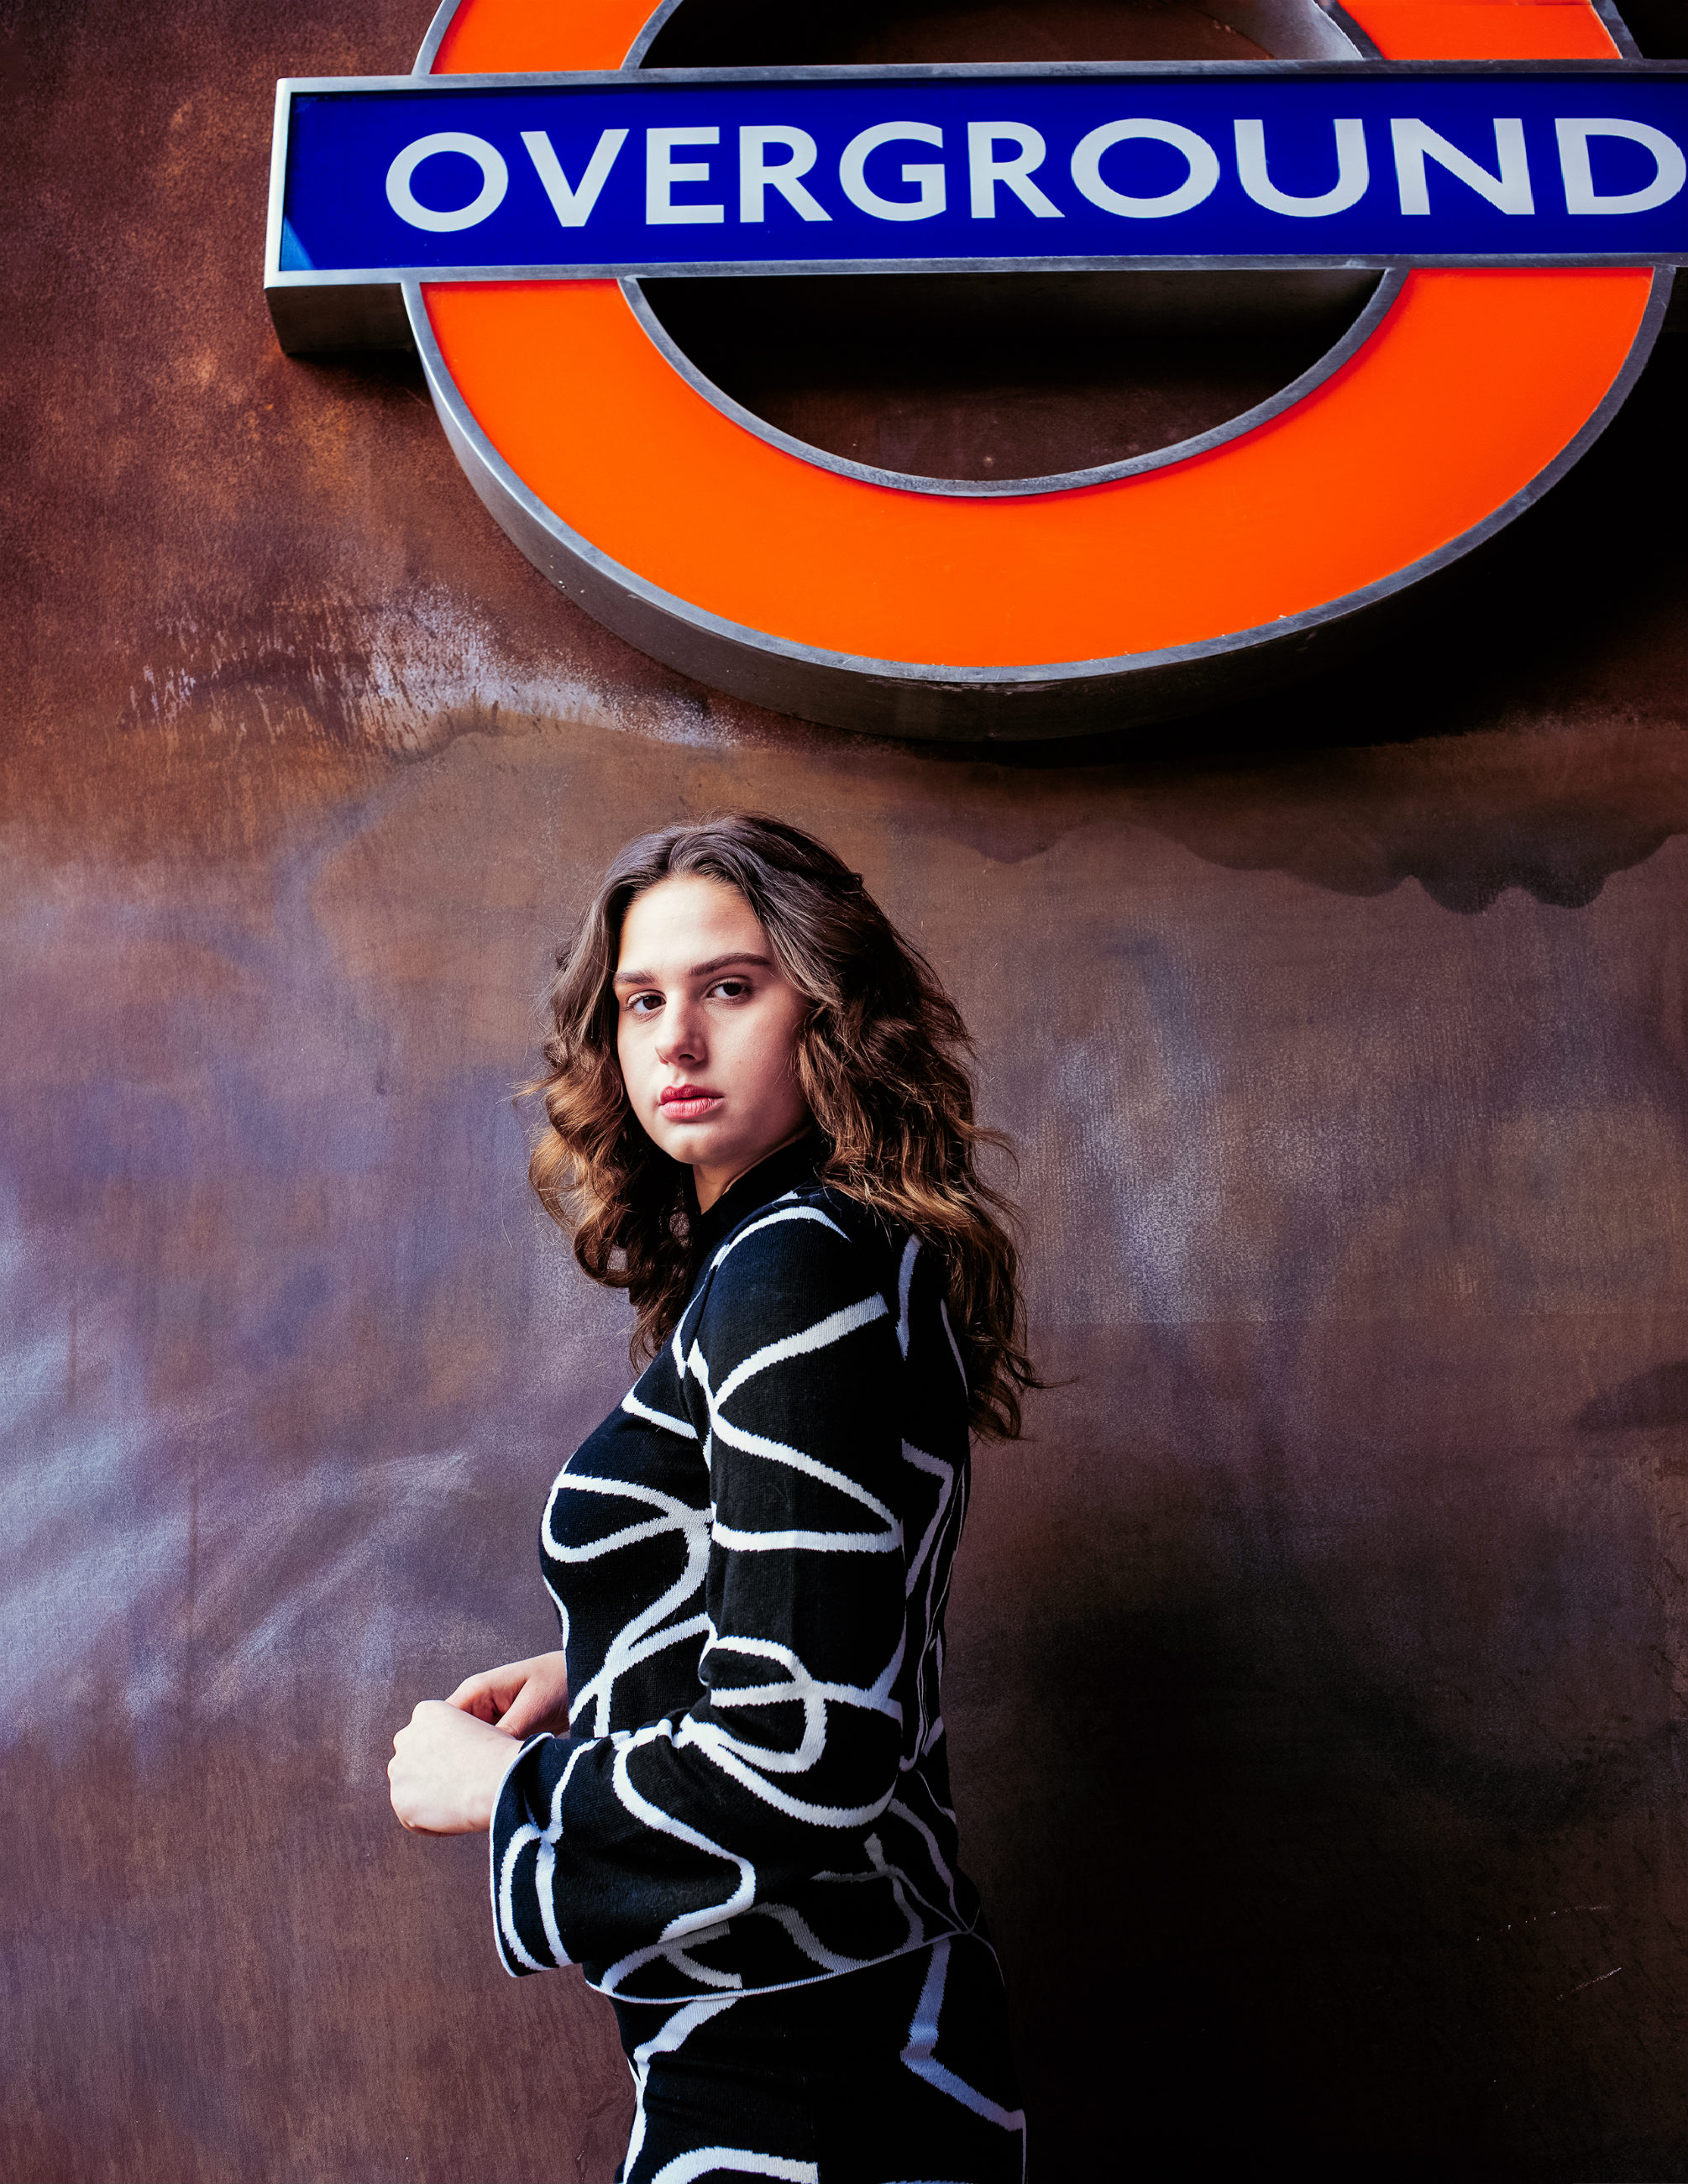 OVERGROUND Fashions Finest shooting. Design by Timna Weber - Ph. Nata Spalding